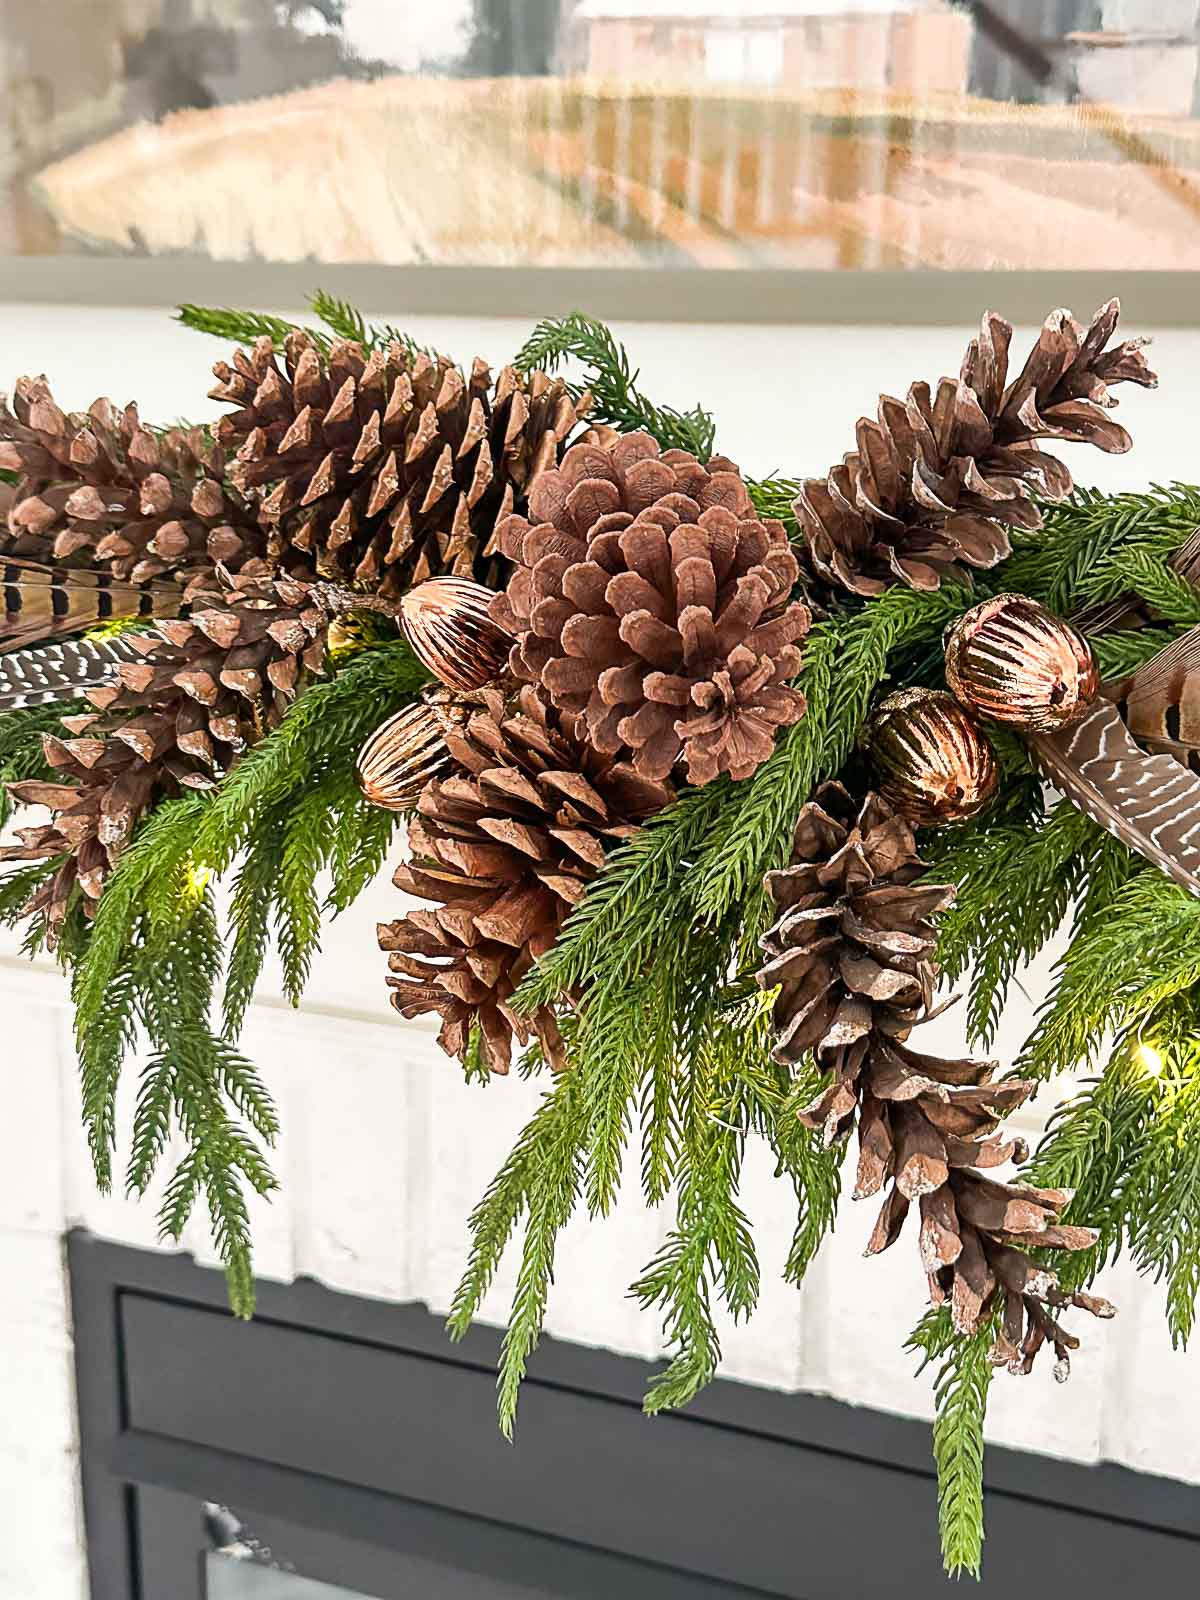 Decorating With Pinecones At Christmas: The Festive Ultimate Guide -  StoneGable